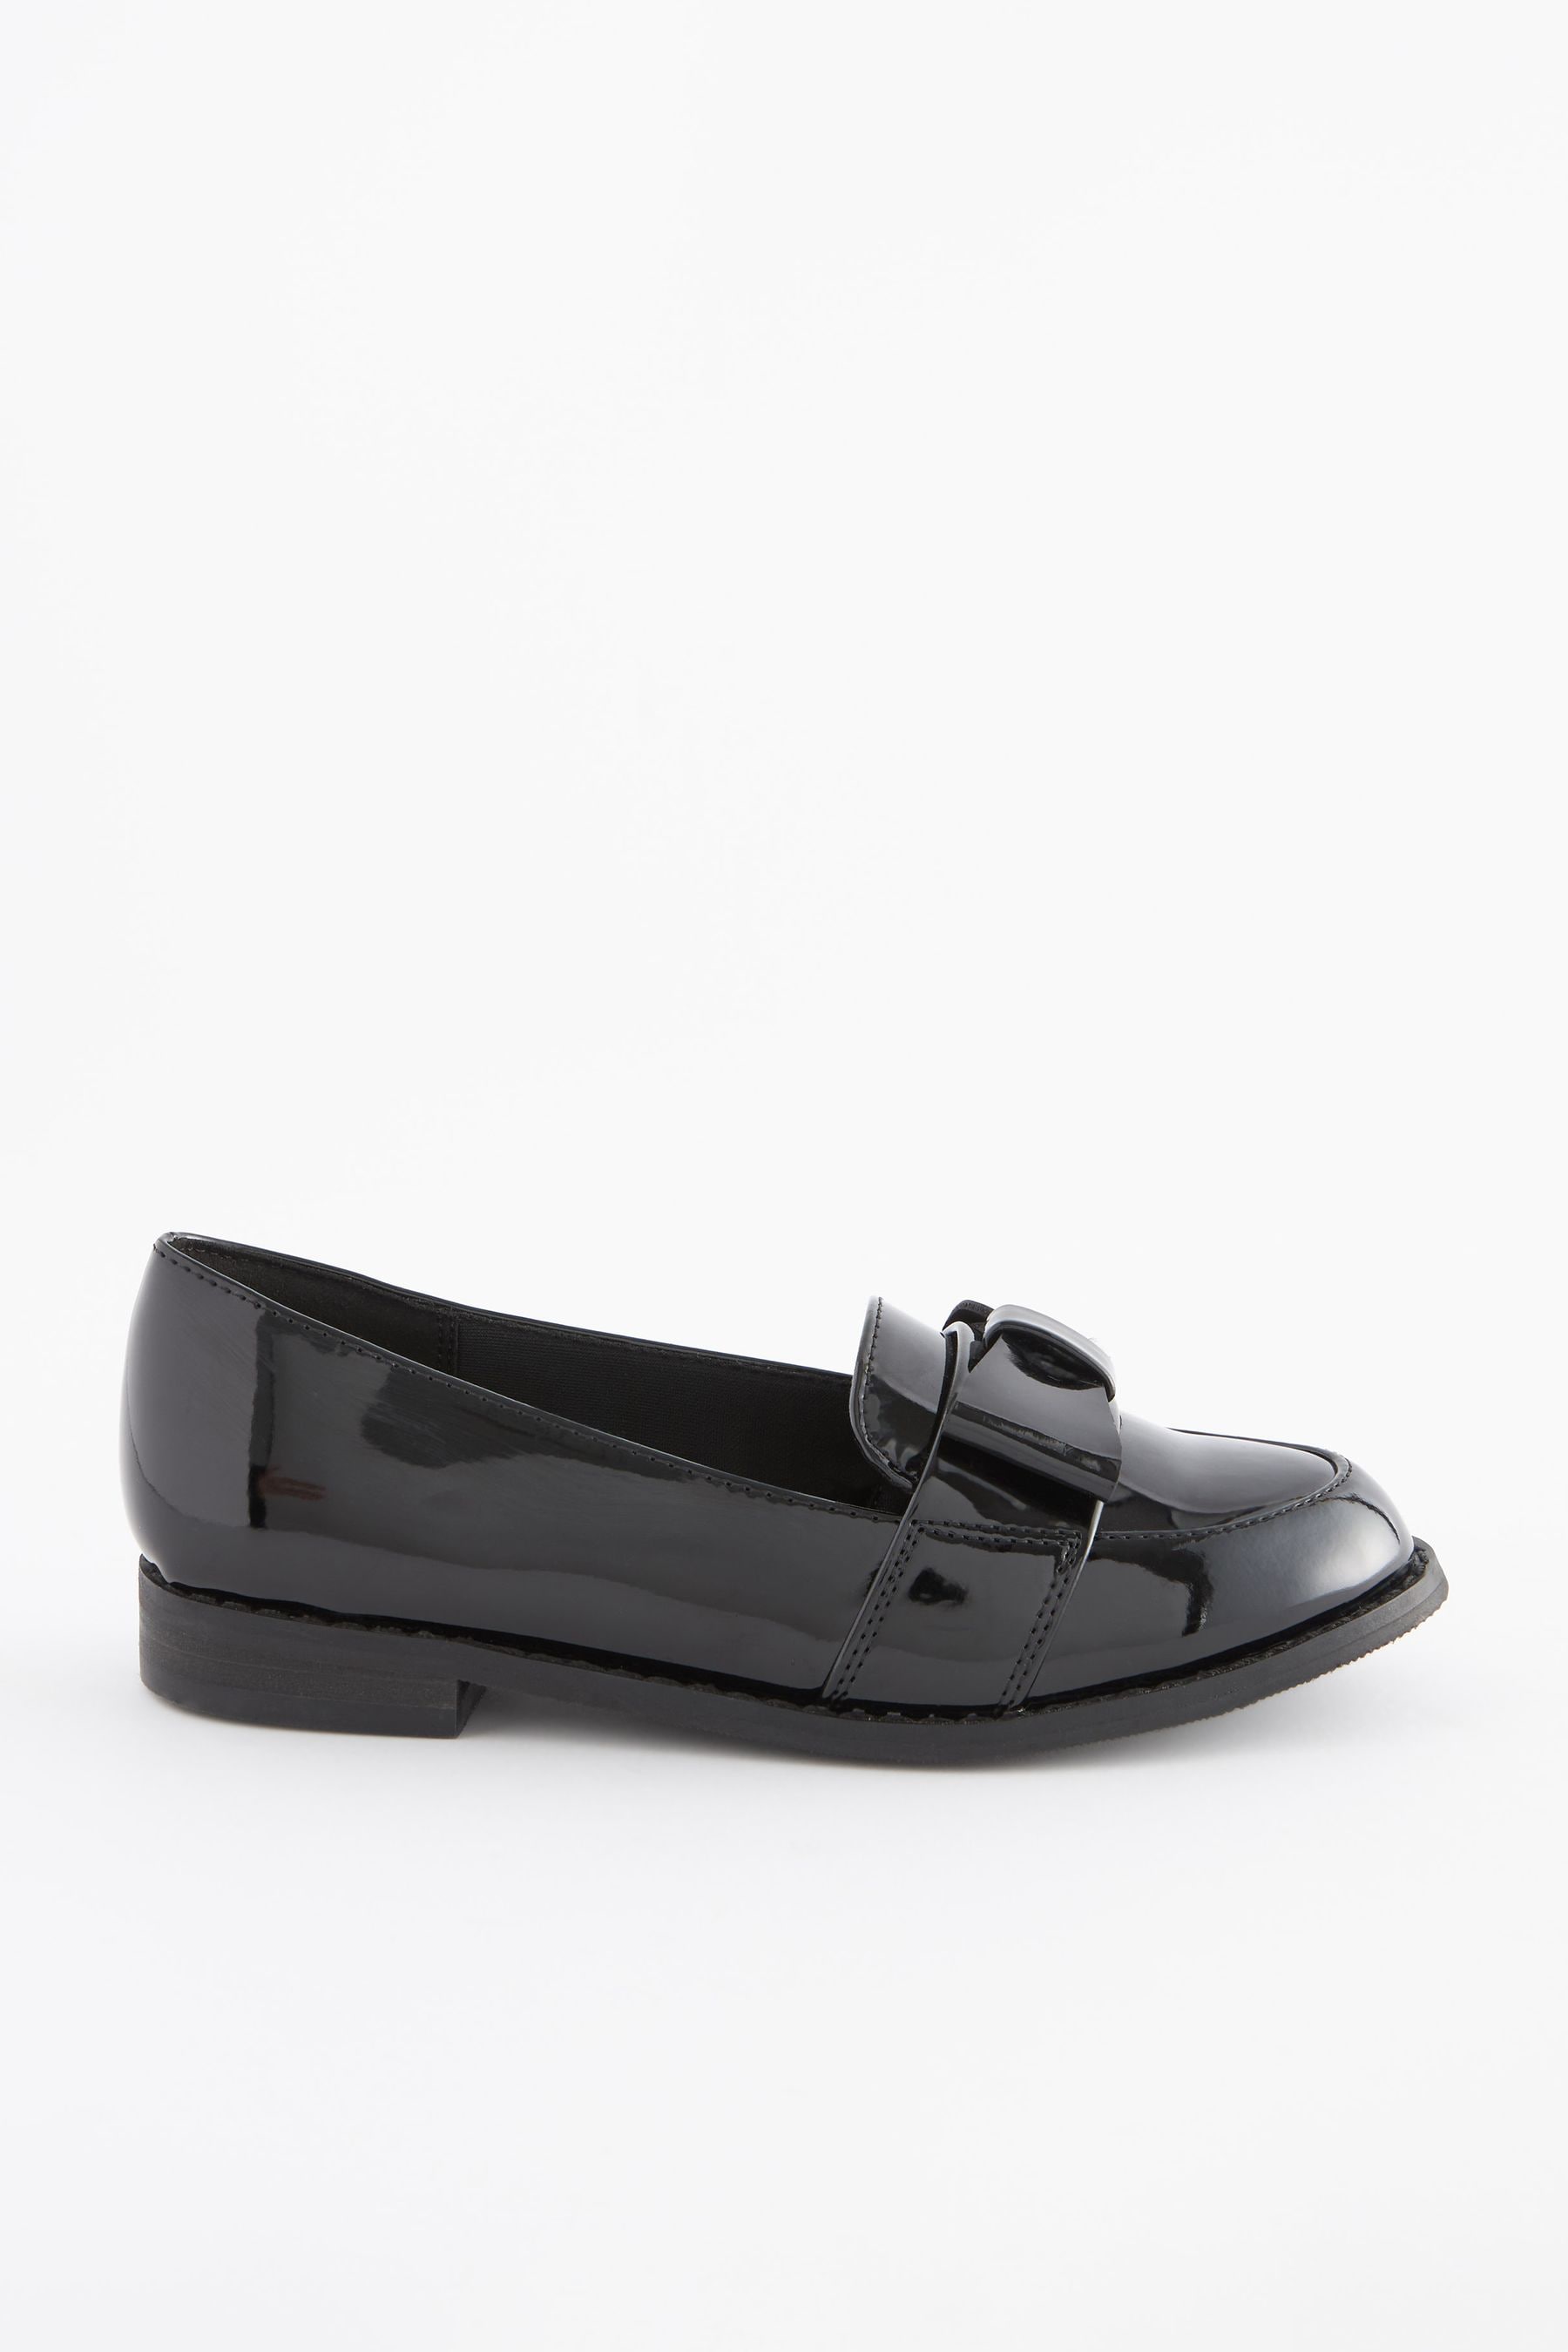 Buy Black Patent School Bow Loafers from the Next UK online shop